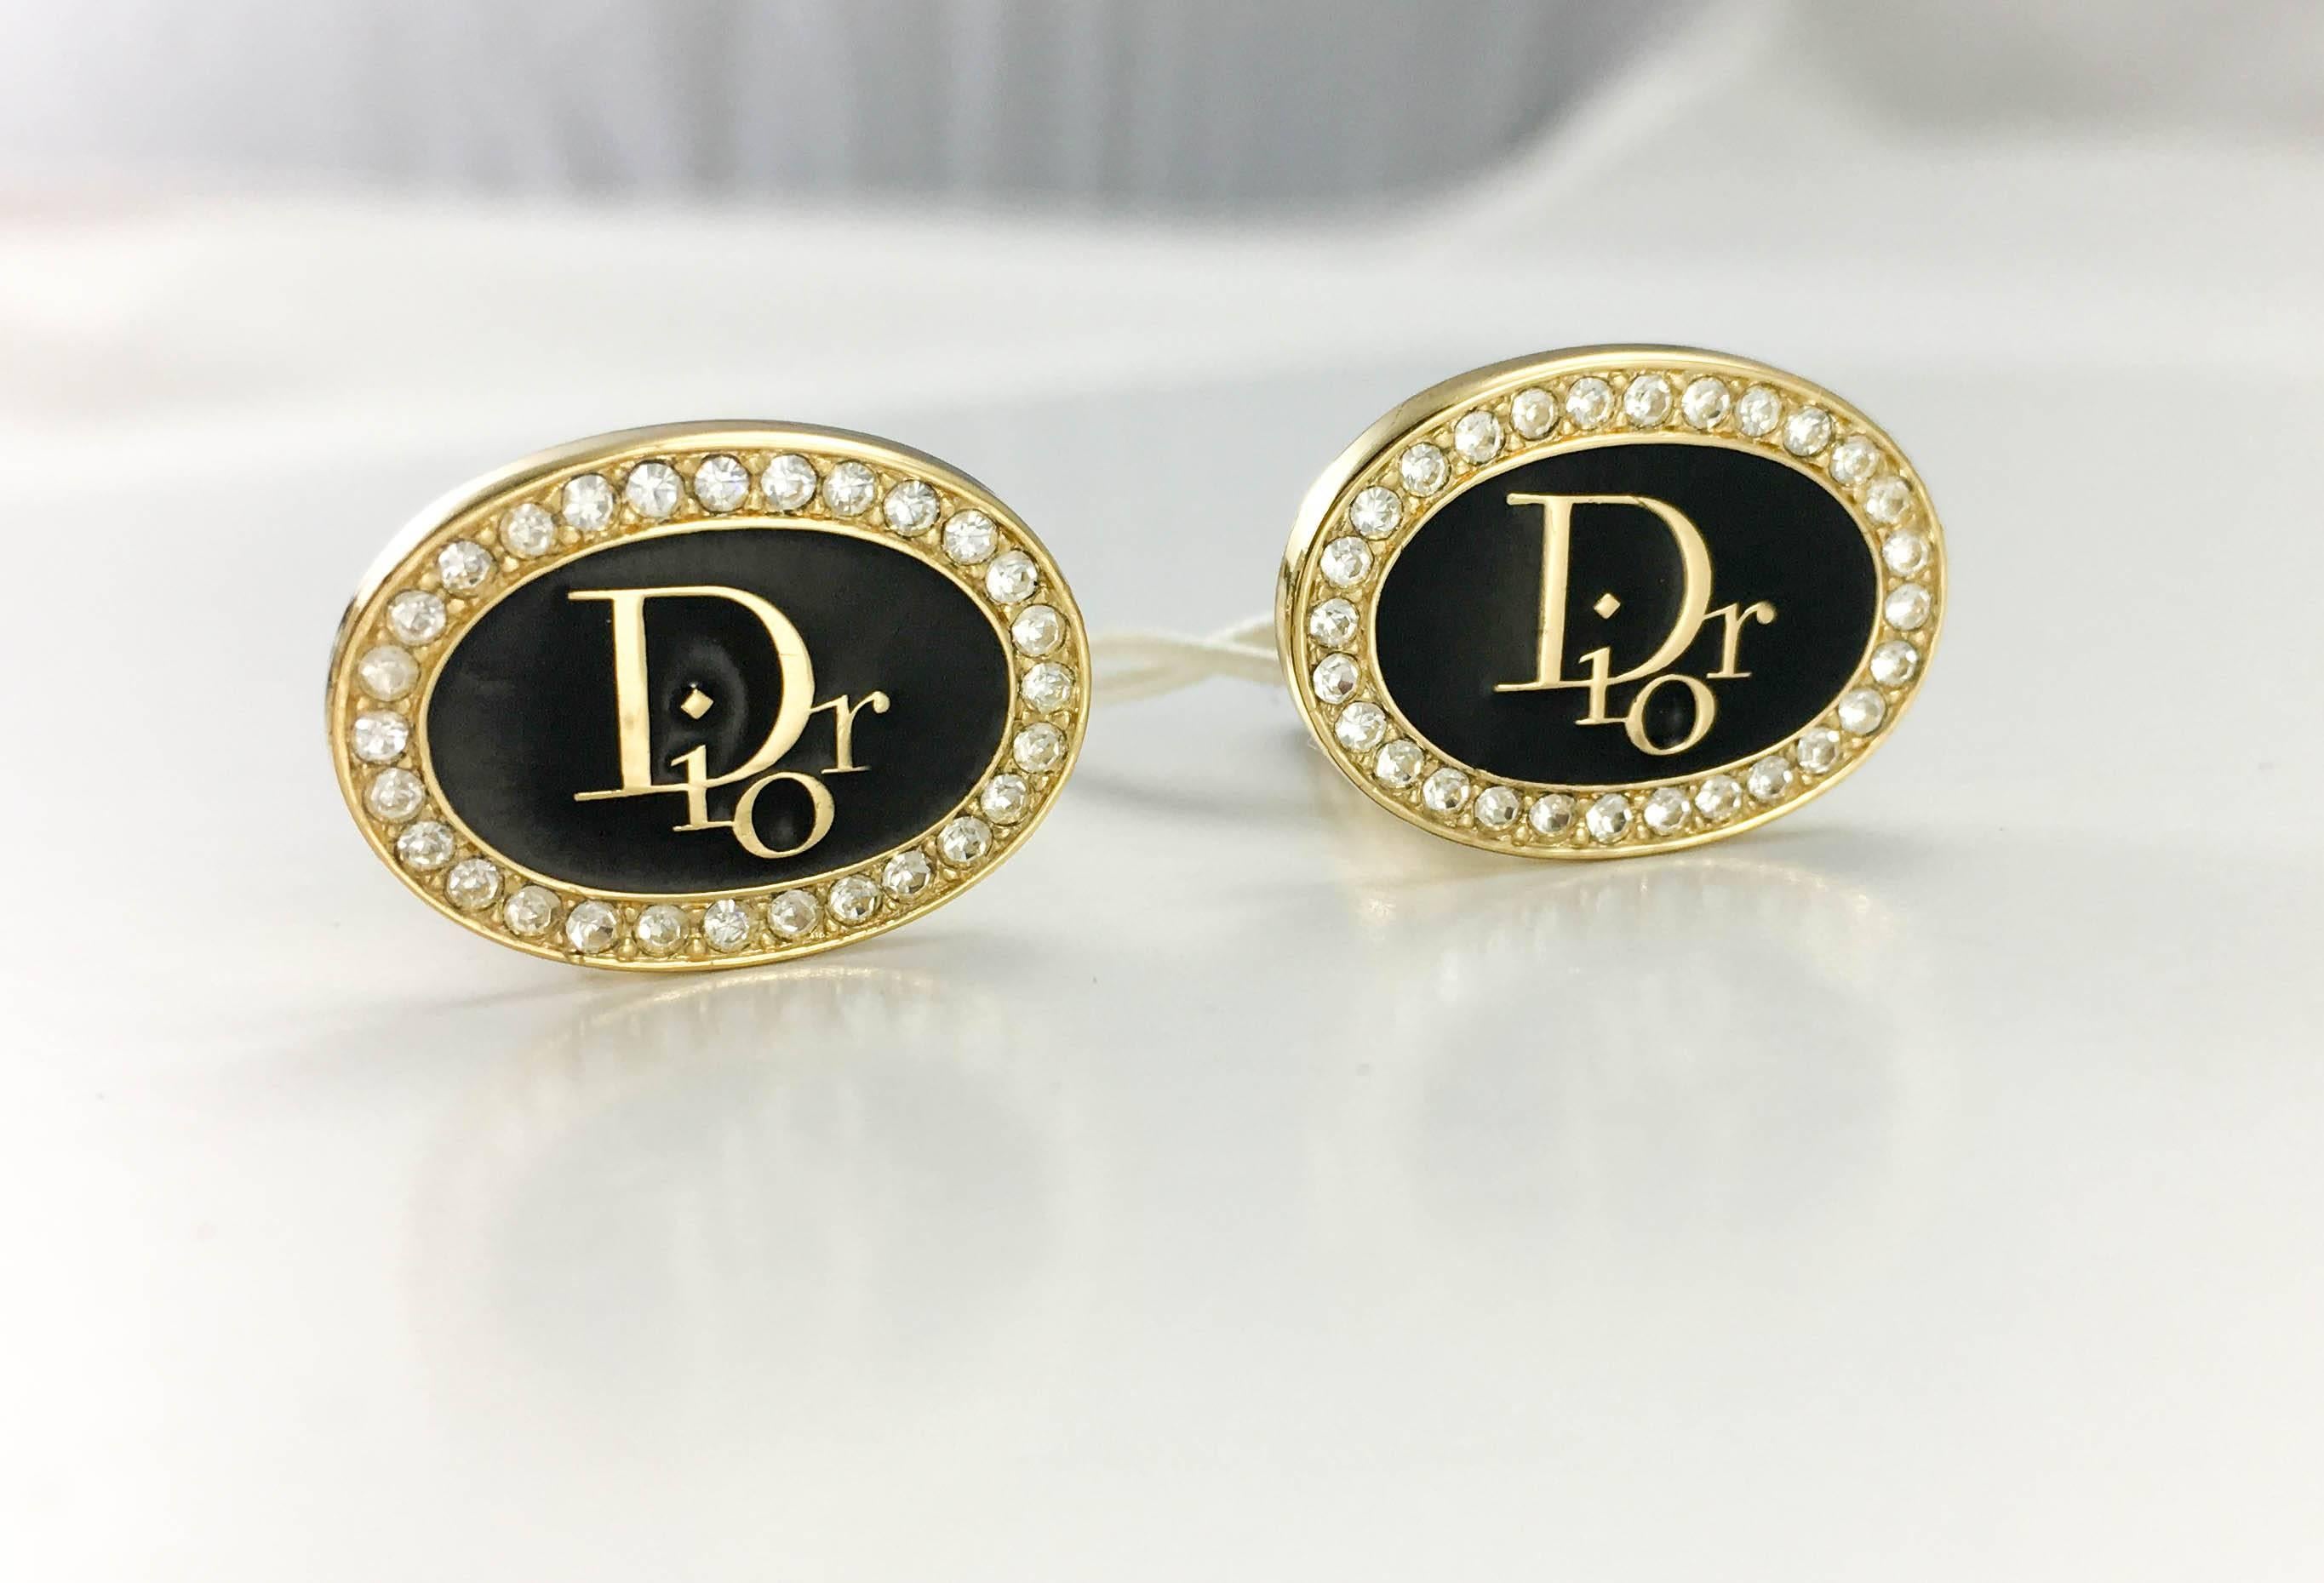 Stylish Vintage Dior Insignia Cufflinks. These beautiful cufflinks by Christian Dior date back from the 1980’s. The oval design features a black enamelled centre saying ‘Dior’ in gold-tone letters and a rhinestone/paste embellished rim, the hardware